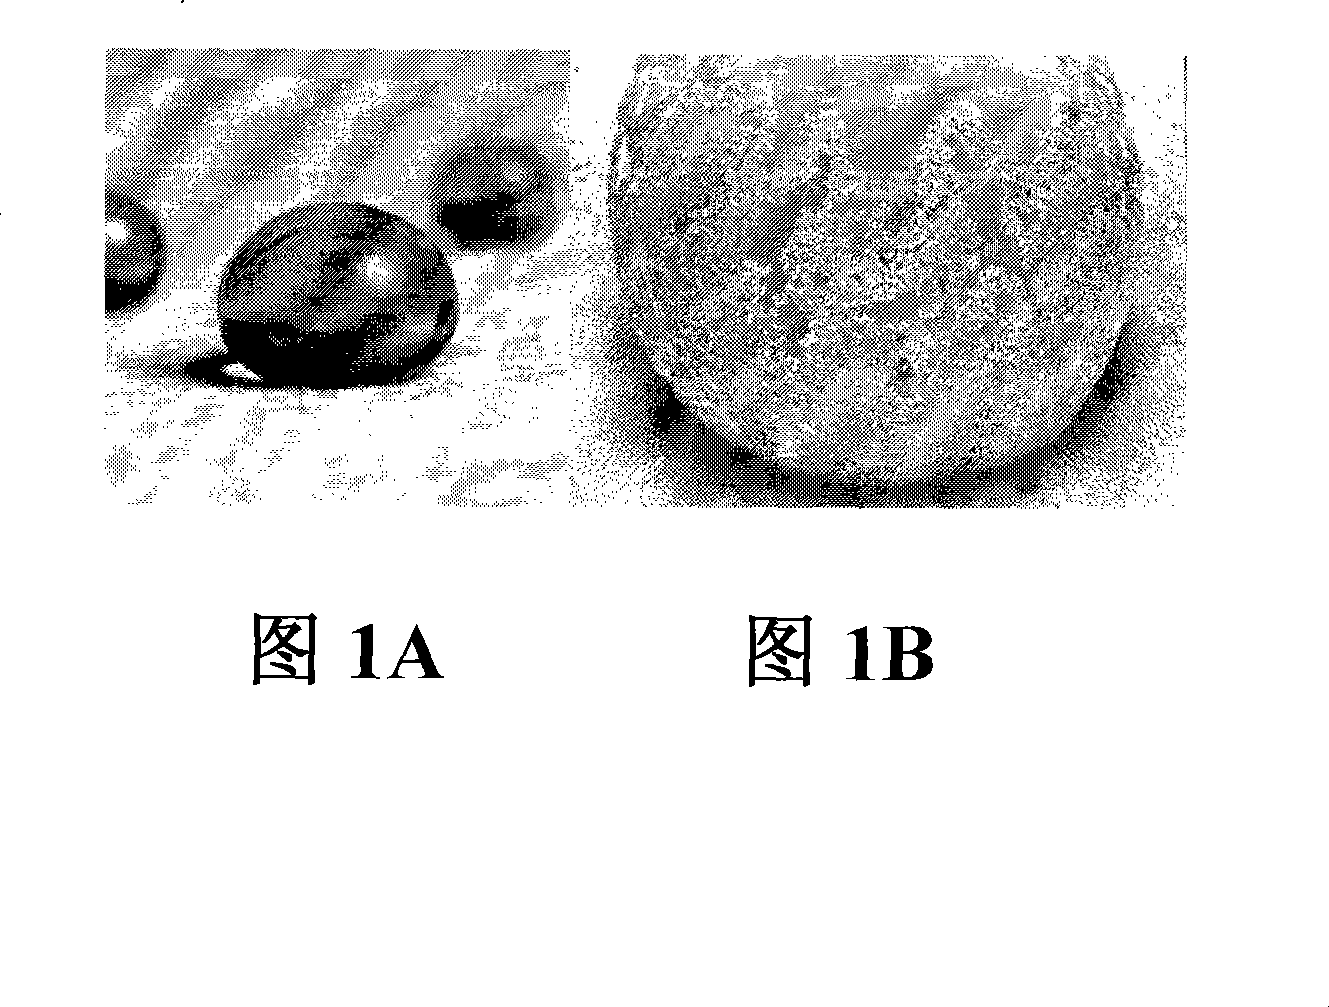 Superhydrophobic surface and method for forming same